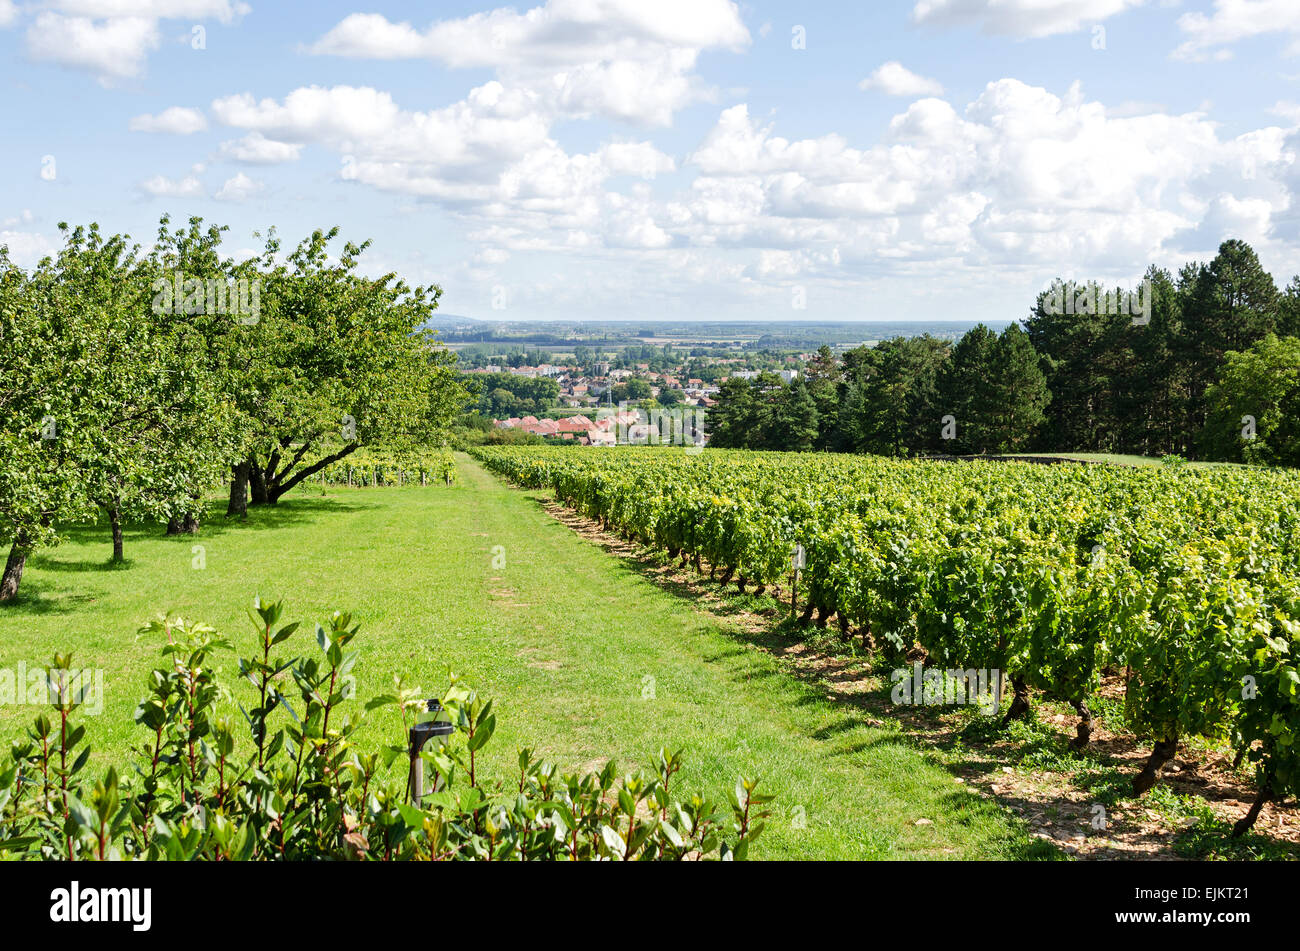 The clos of Domaine de la Folie, a vineyard near Chagny in Burgundy, France, has a magnificent view over the countryside. Stock Photo